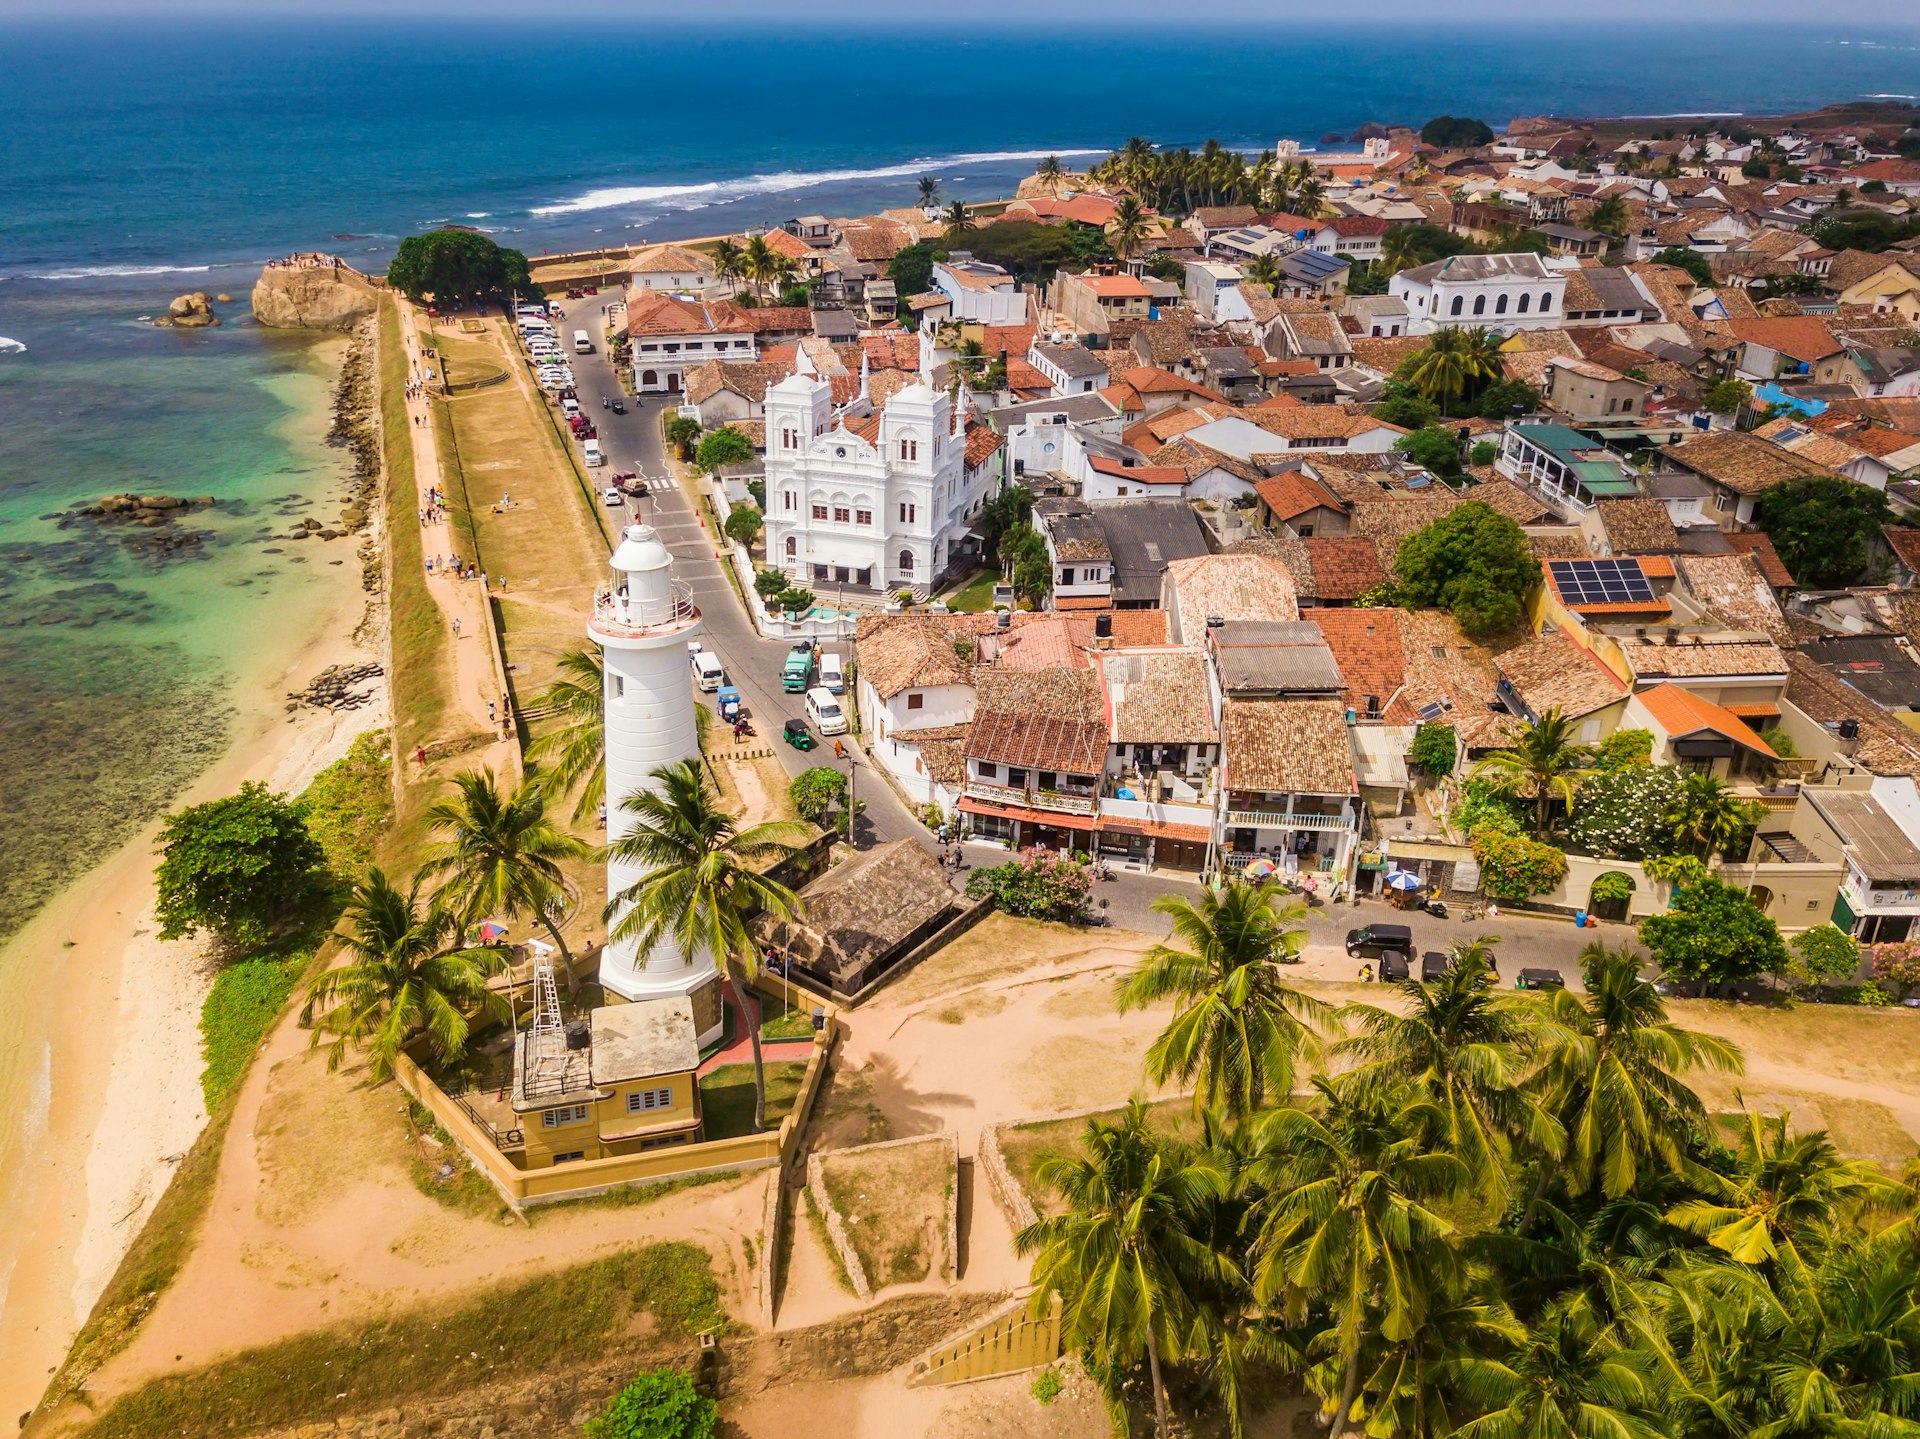 A view of the Dutch Fort at Galle, Sri Lanka